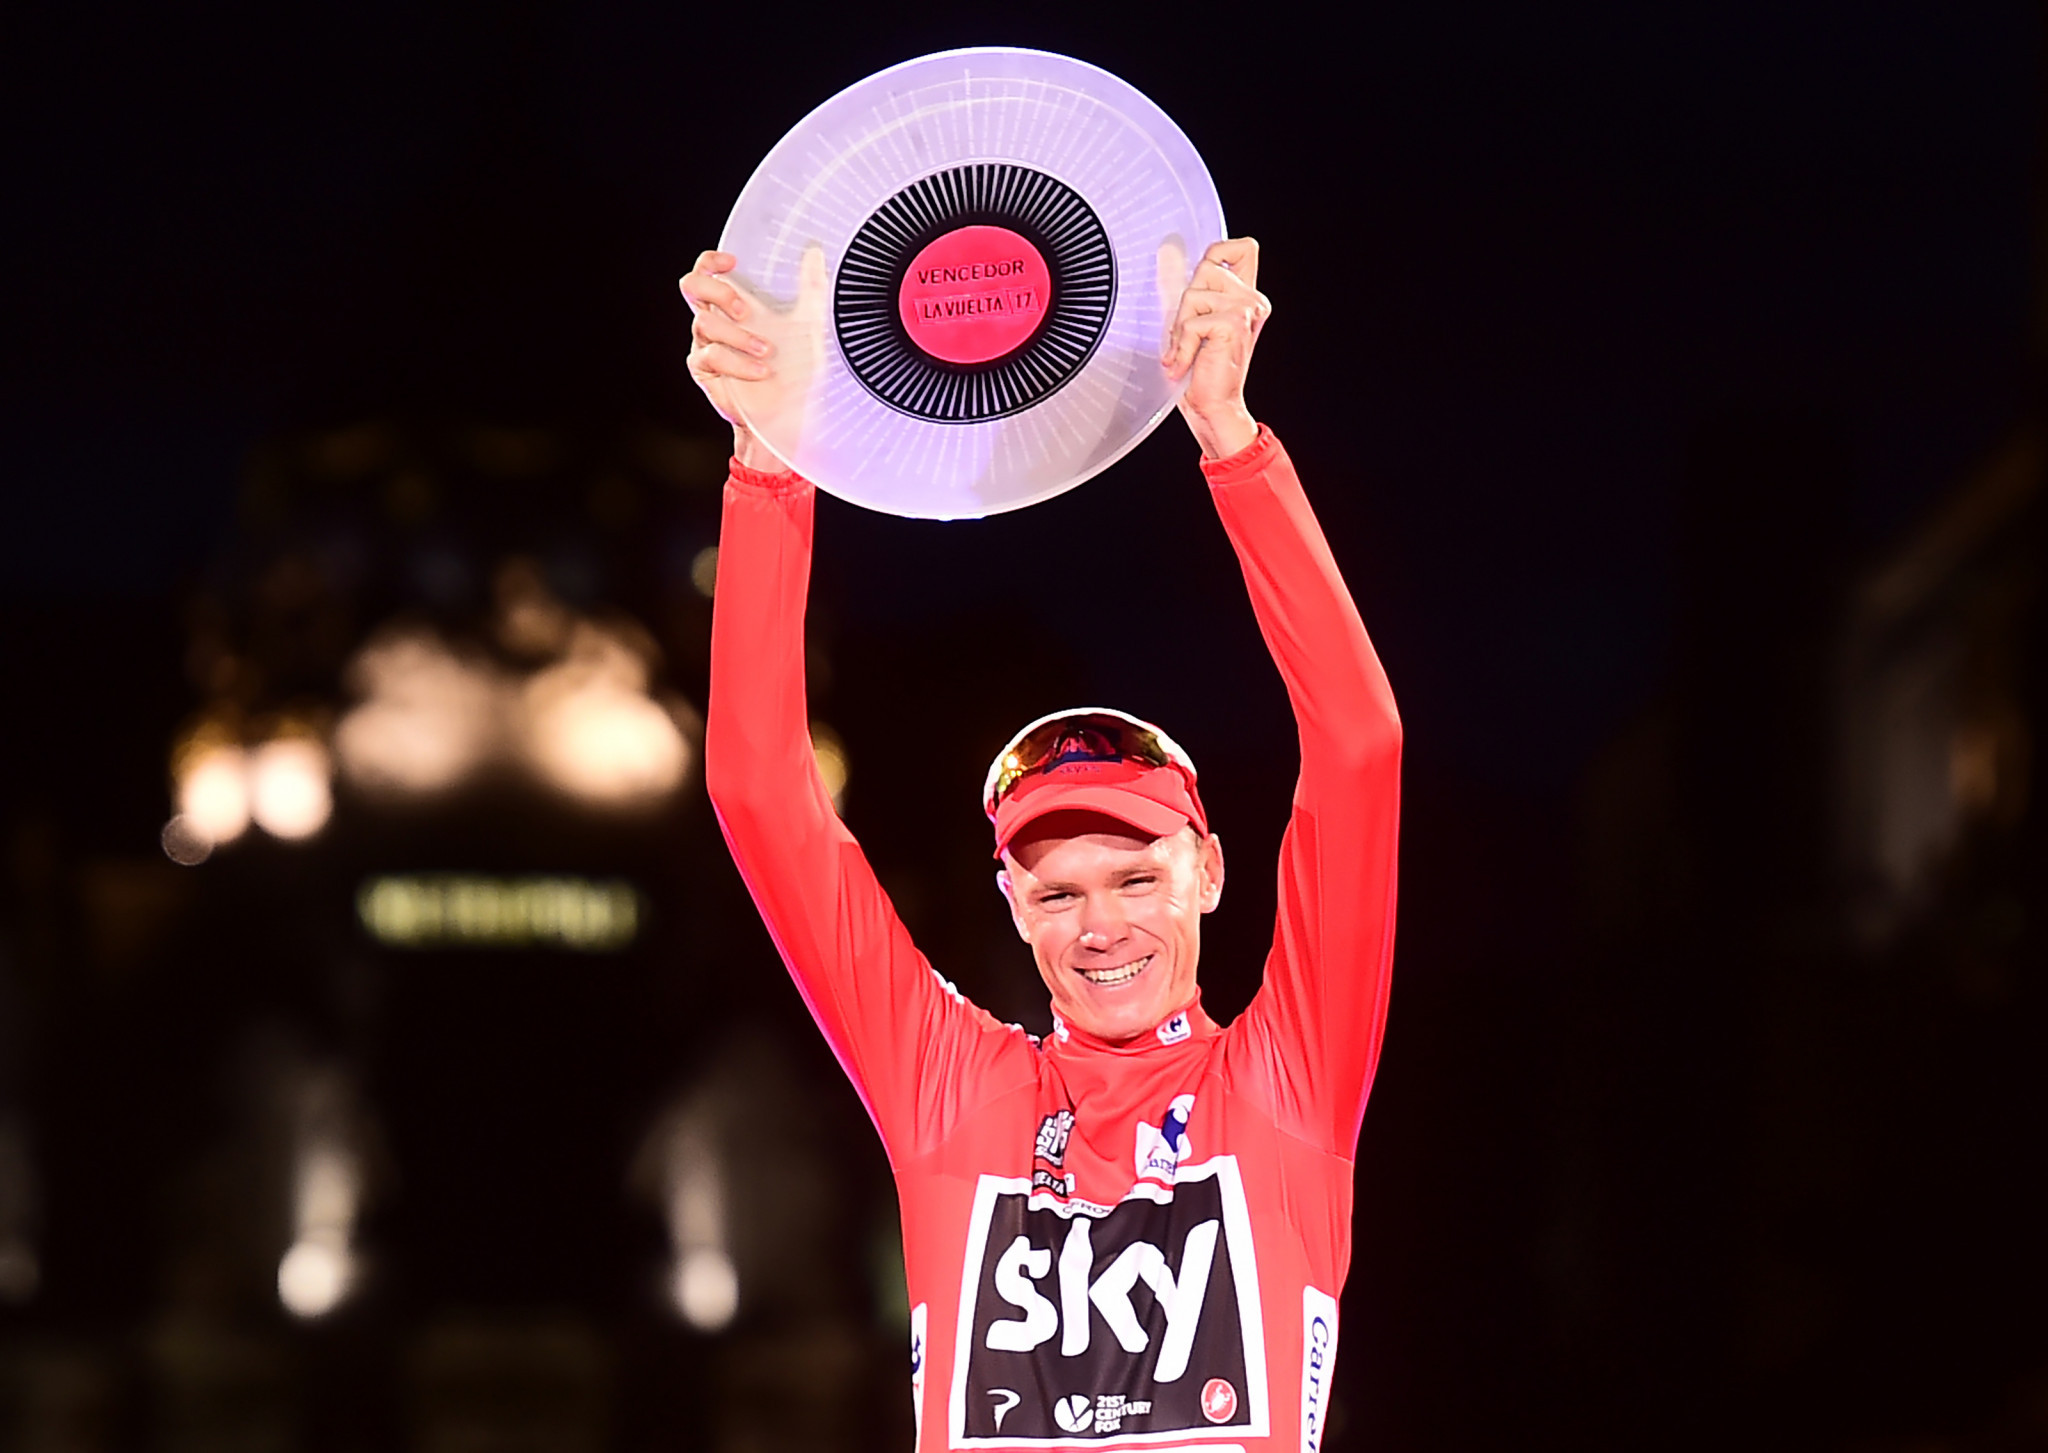 Chris Froome's win at the Vuelta has been tarnished by a failed drugs test, although he denies wrongdoing ©Getty Images